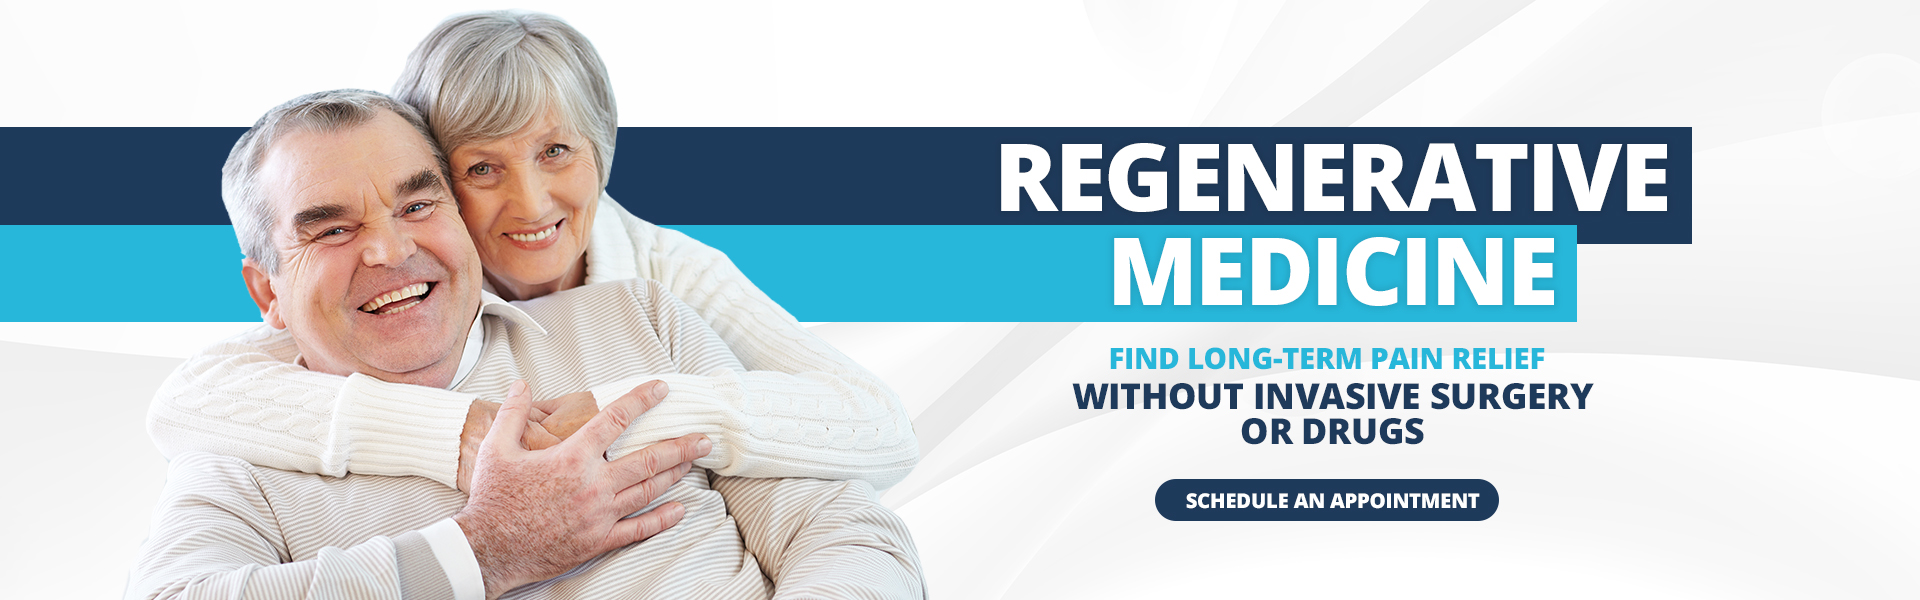 Regenerative Medicine - Find long-term pain relief without invasive surgery or drugs with button to schedule an appointment